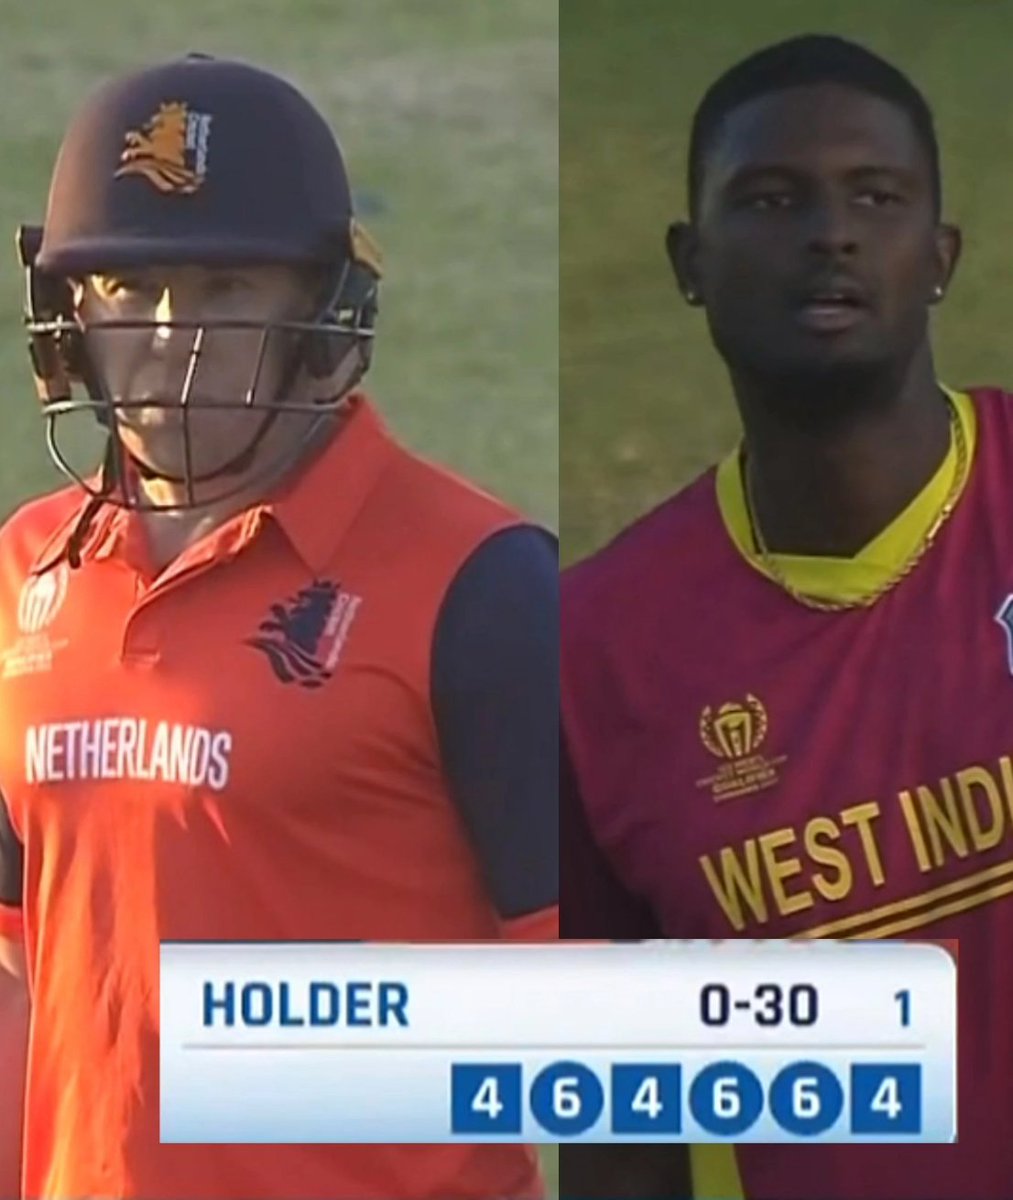 Remember the name 'LOGAN VAN BEEK' 🙌🏻
A match for the ages to come🧡
#ICCWorldCupQualifiers #WorldCup2023 #jasonholder #loganvanbeek #Netherlands #Westindies #pooran  #superover #windies #CWC23Qualifiers #bcci  #CWCQualifier #wankhede